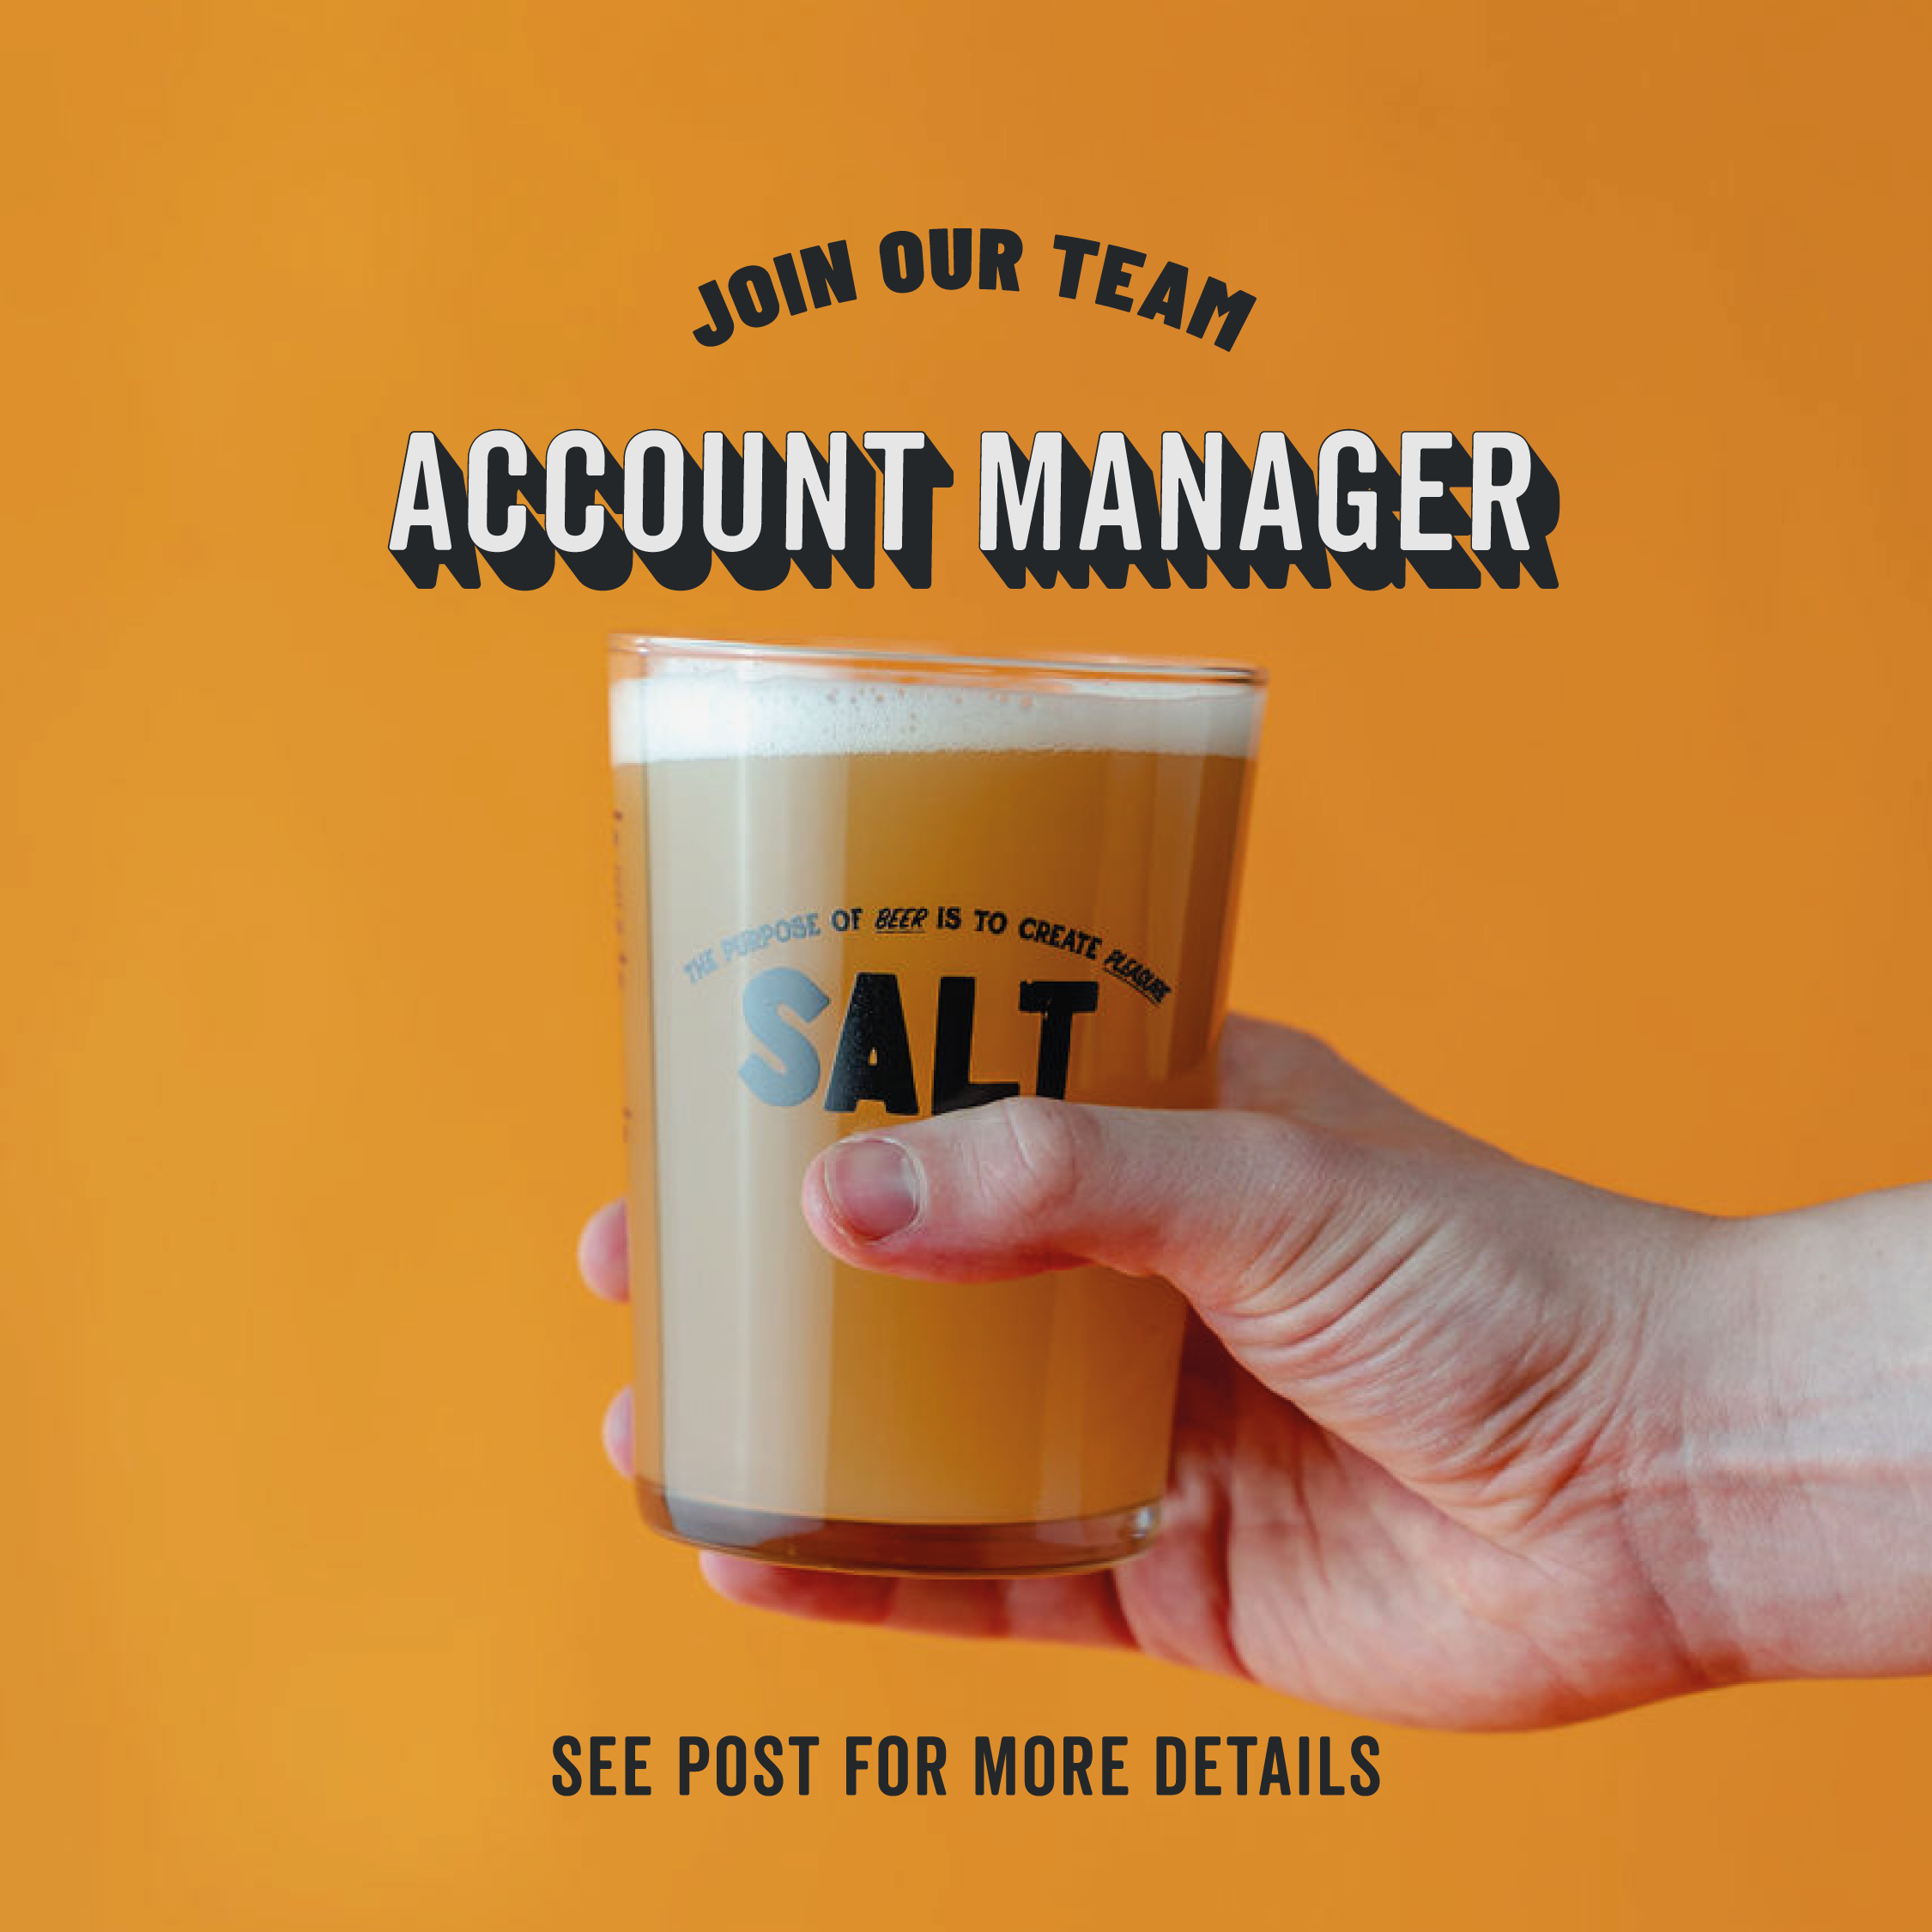 We're Hiring! Account Manager